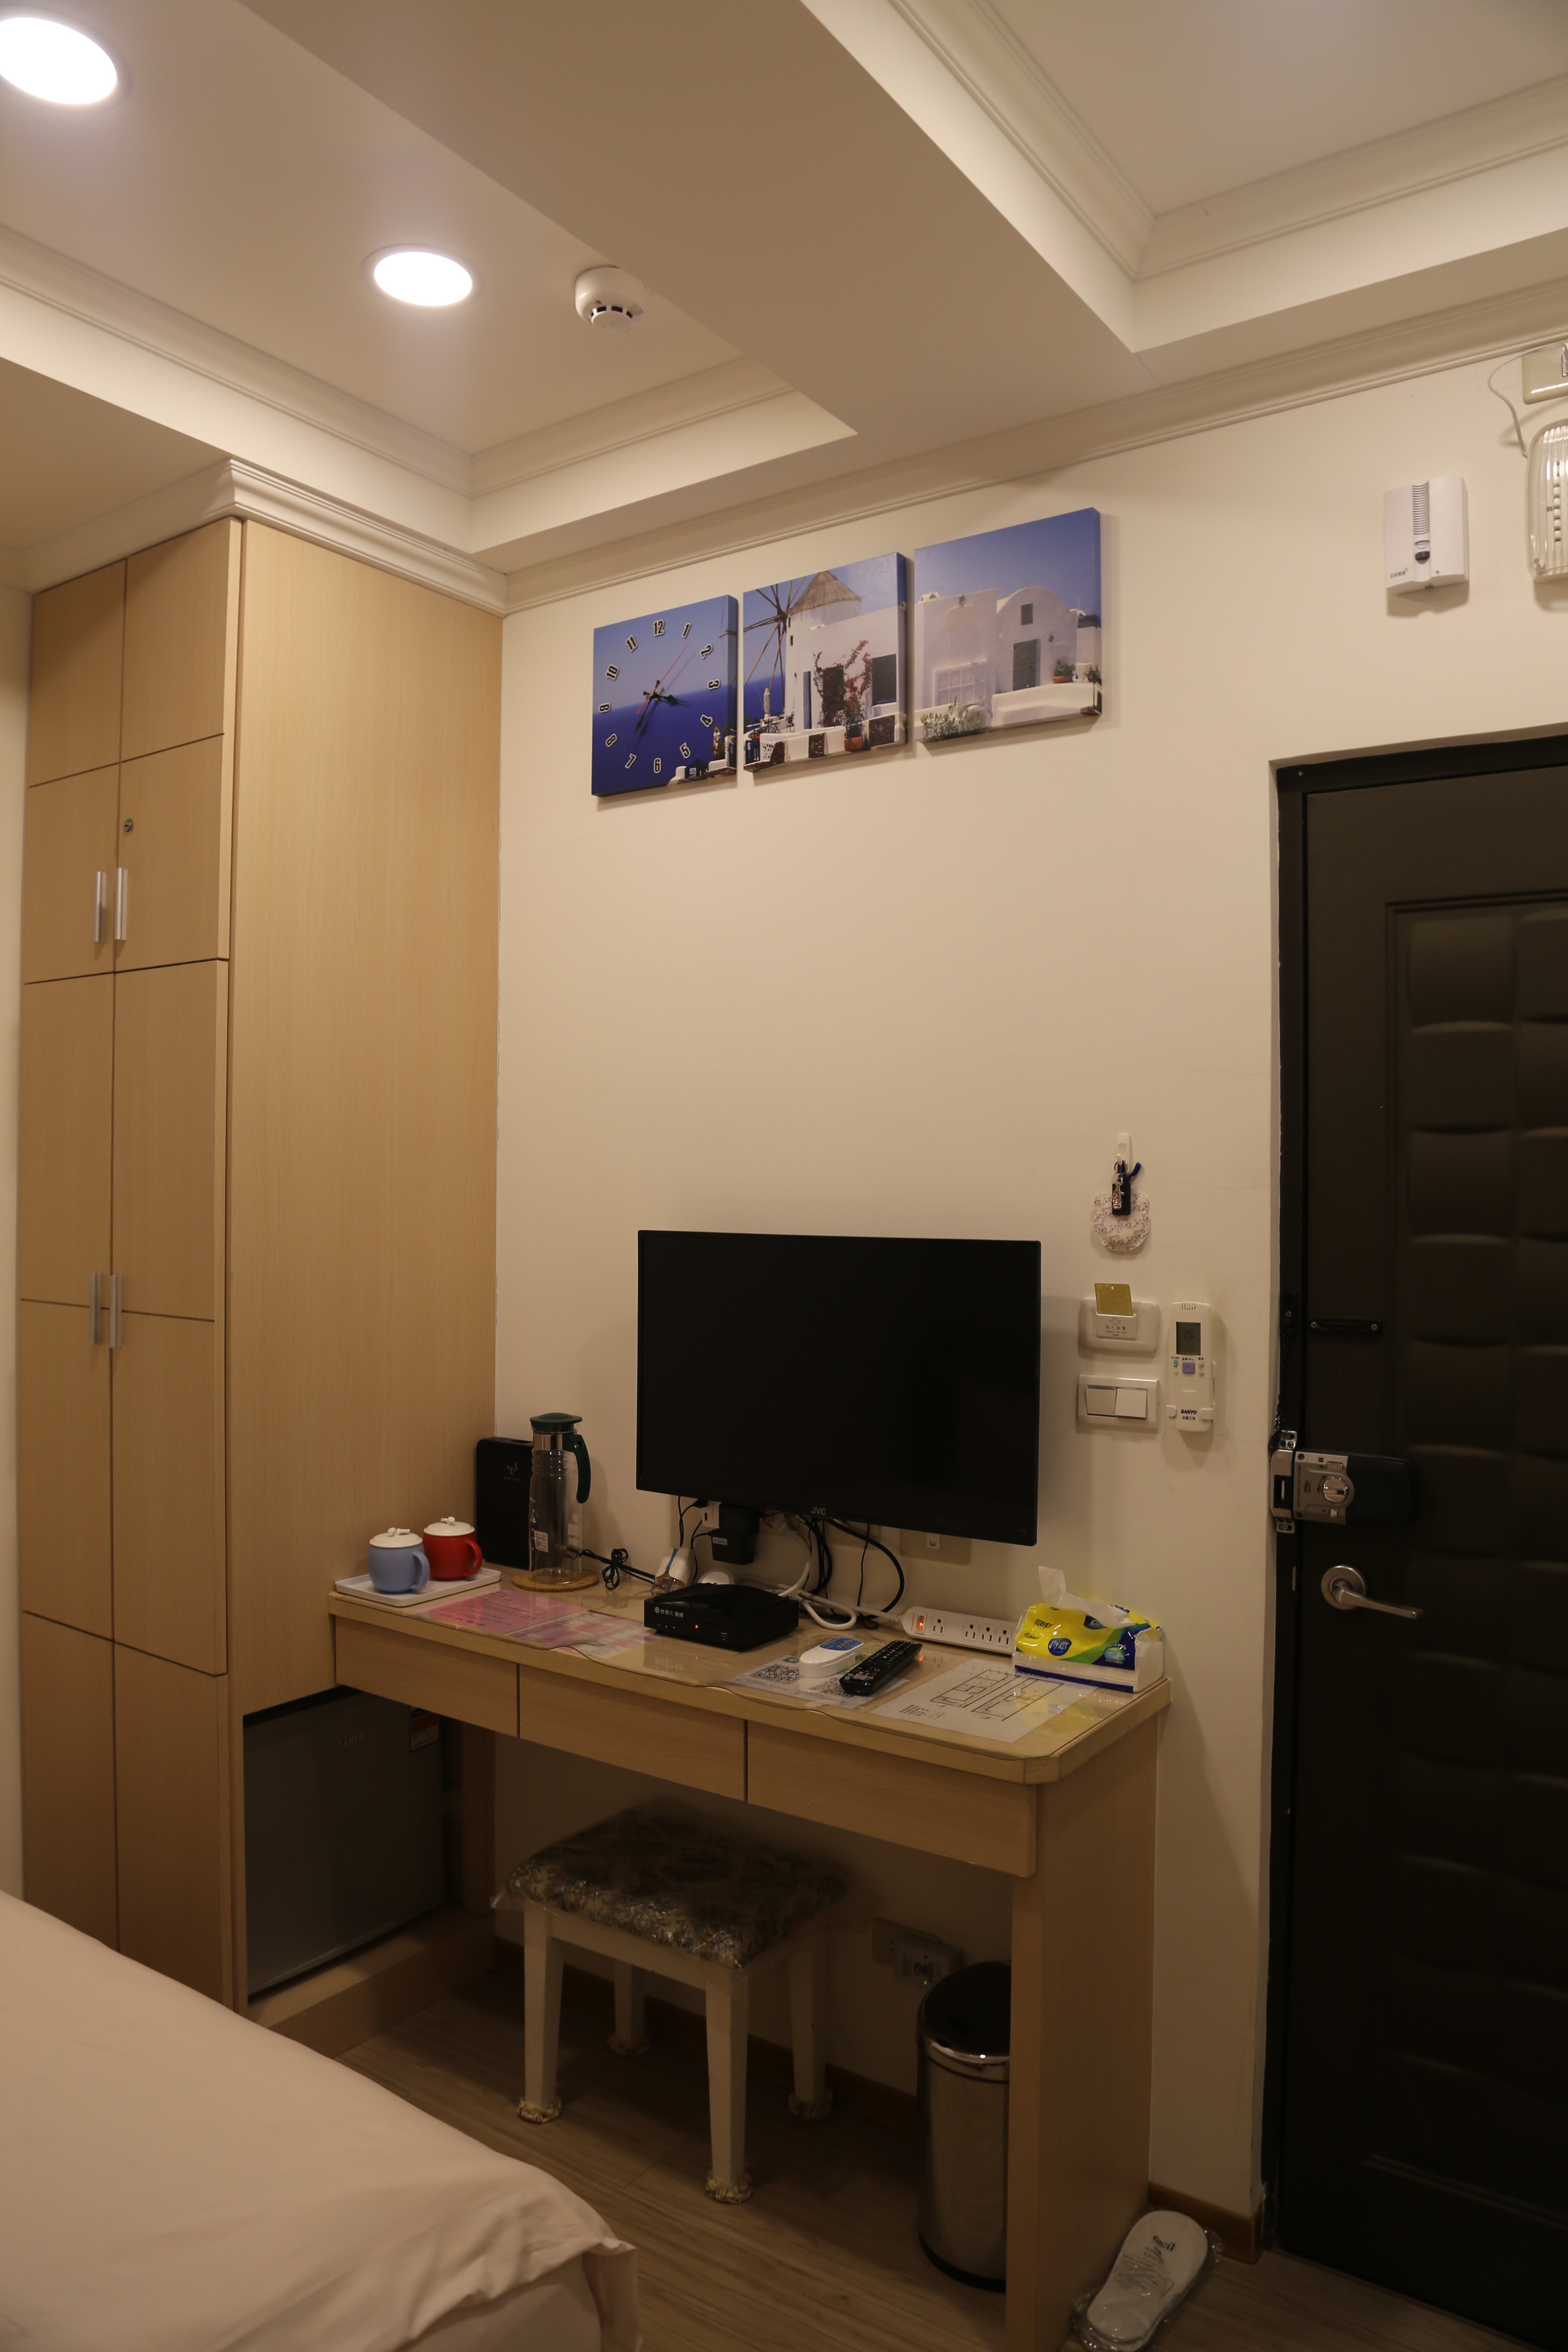 TamSui HomeStay